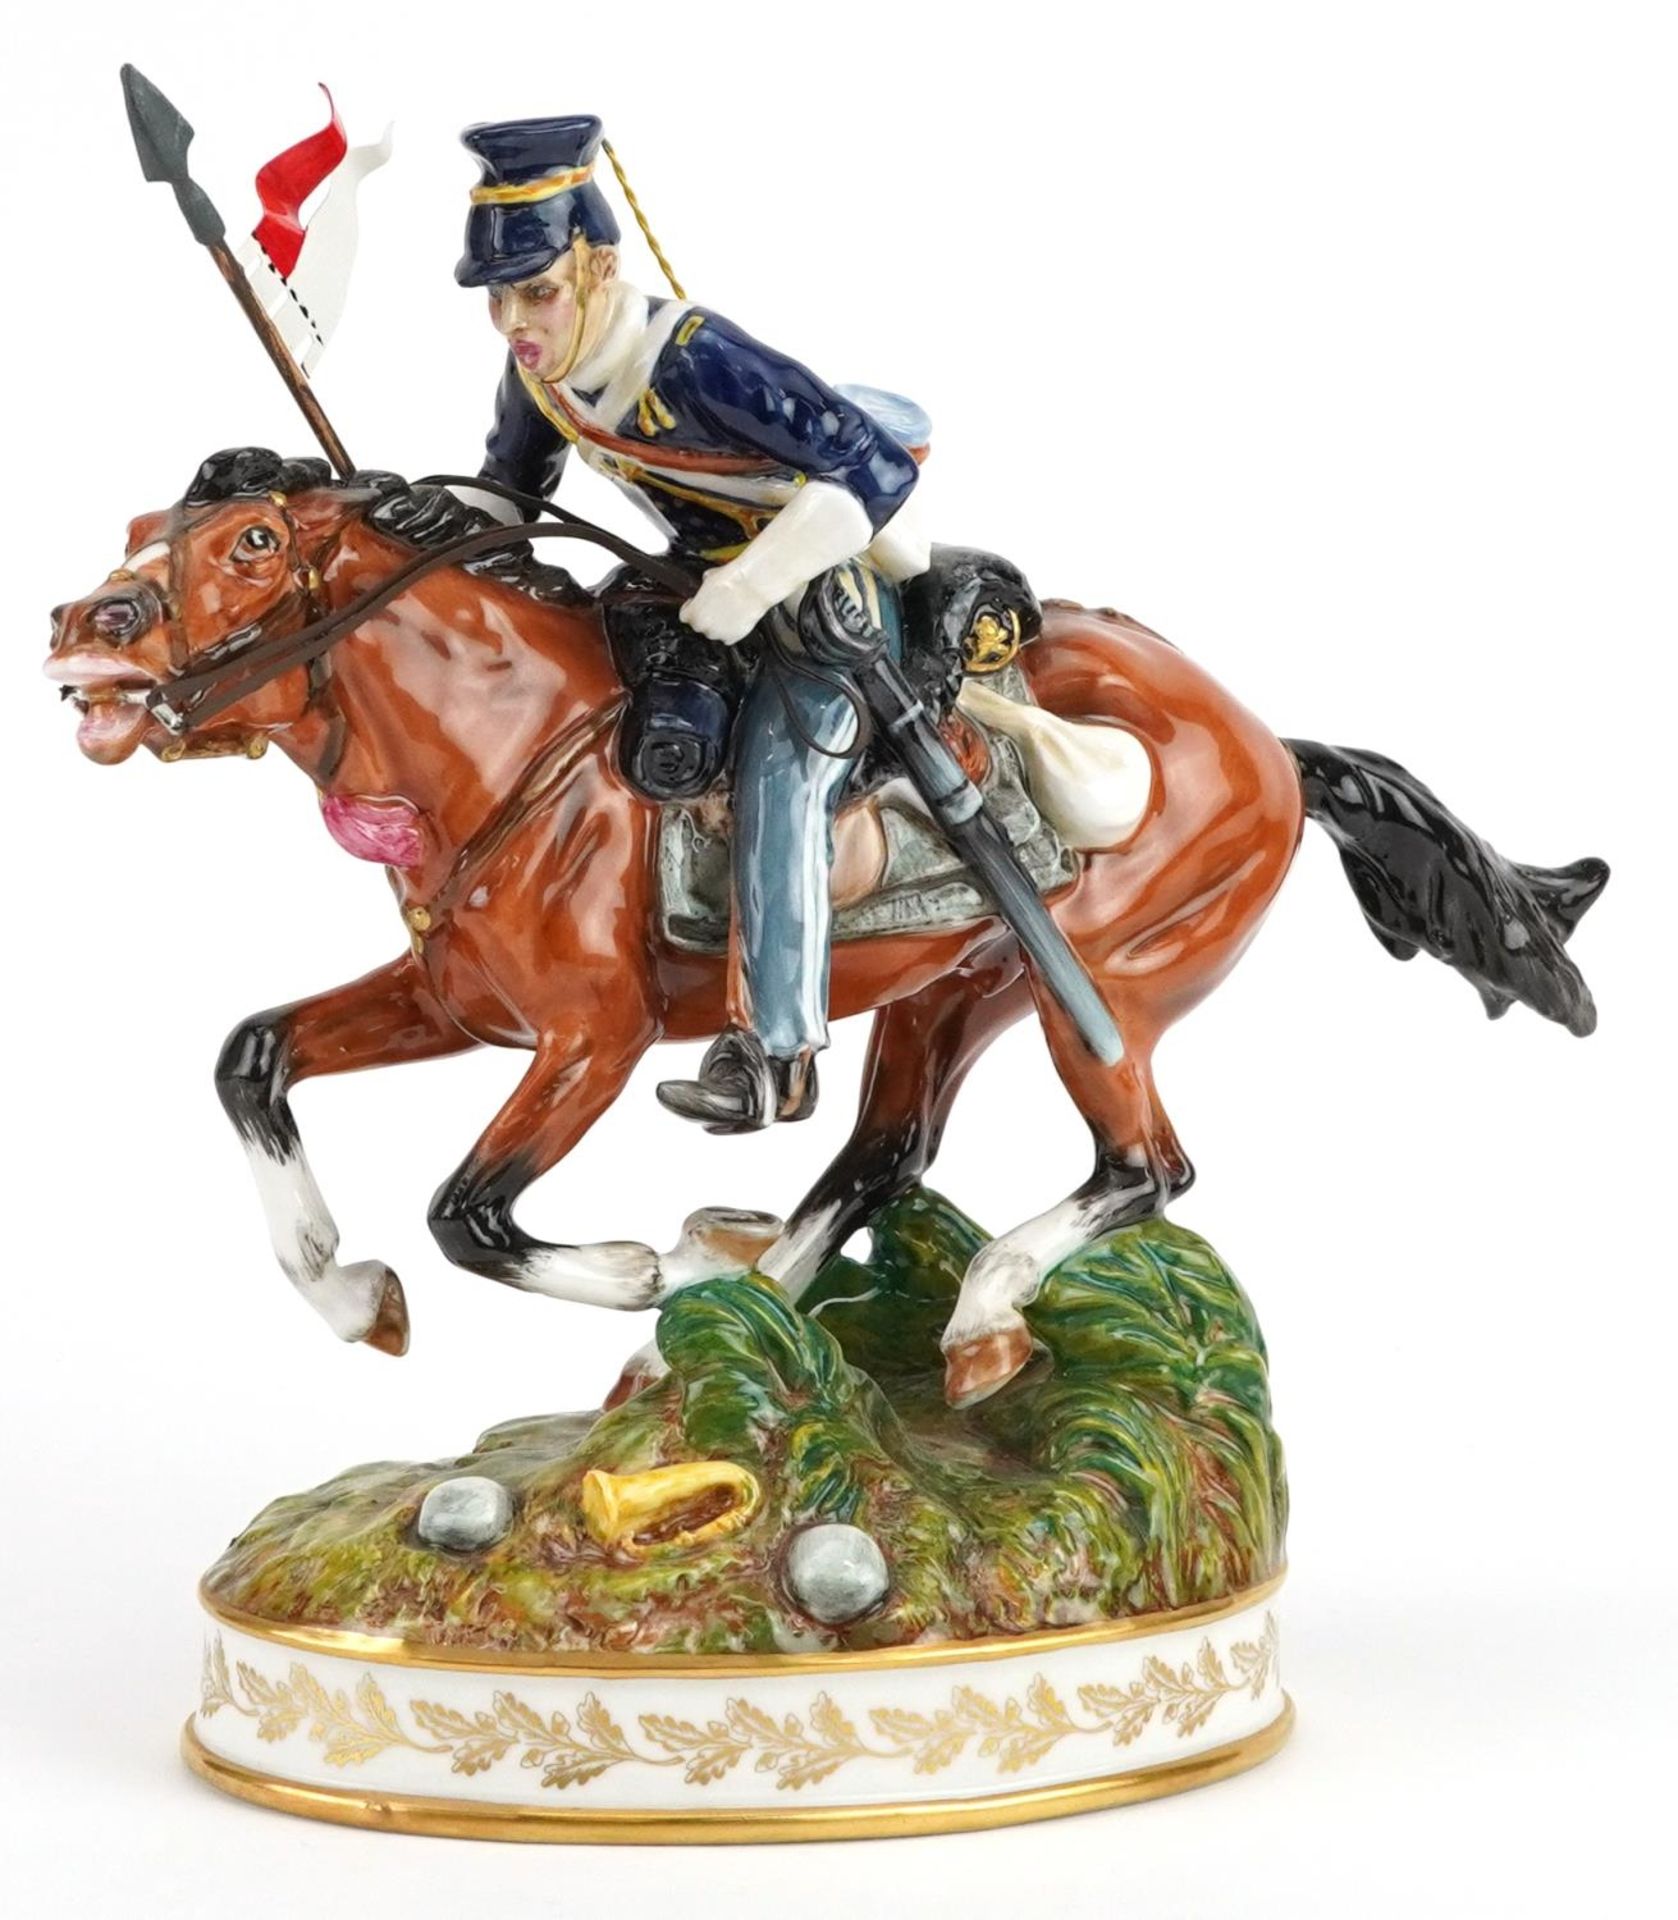 Royal Doulton Charge of the Light Brigade figure group HN4486, 23cm in length : For further